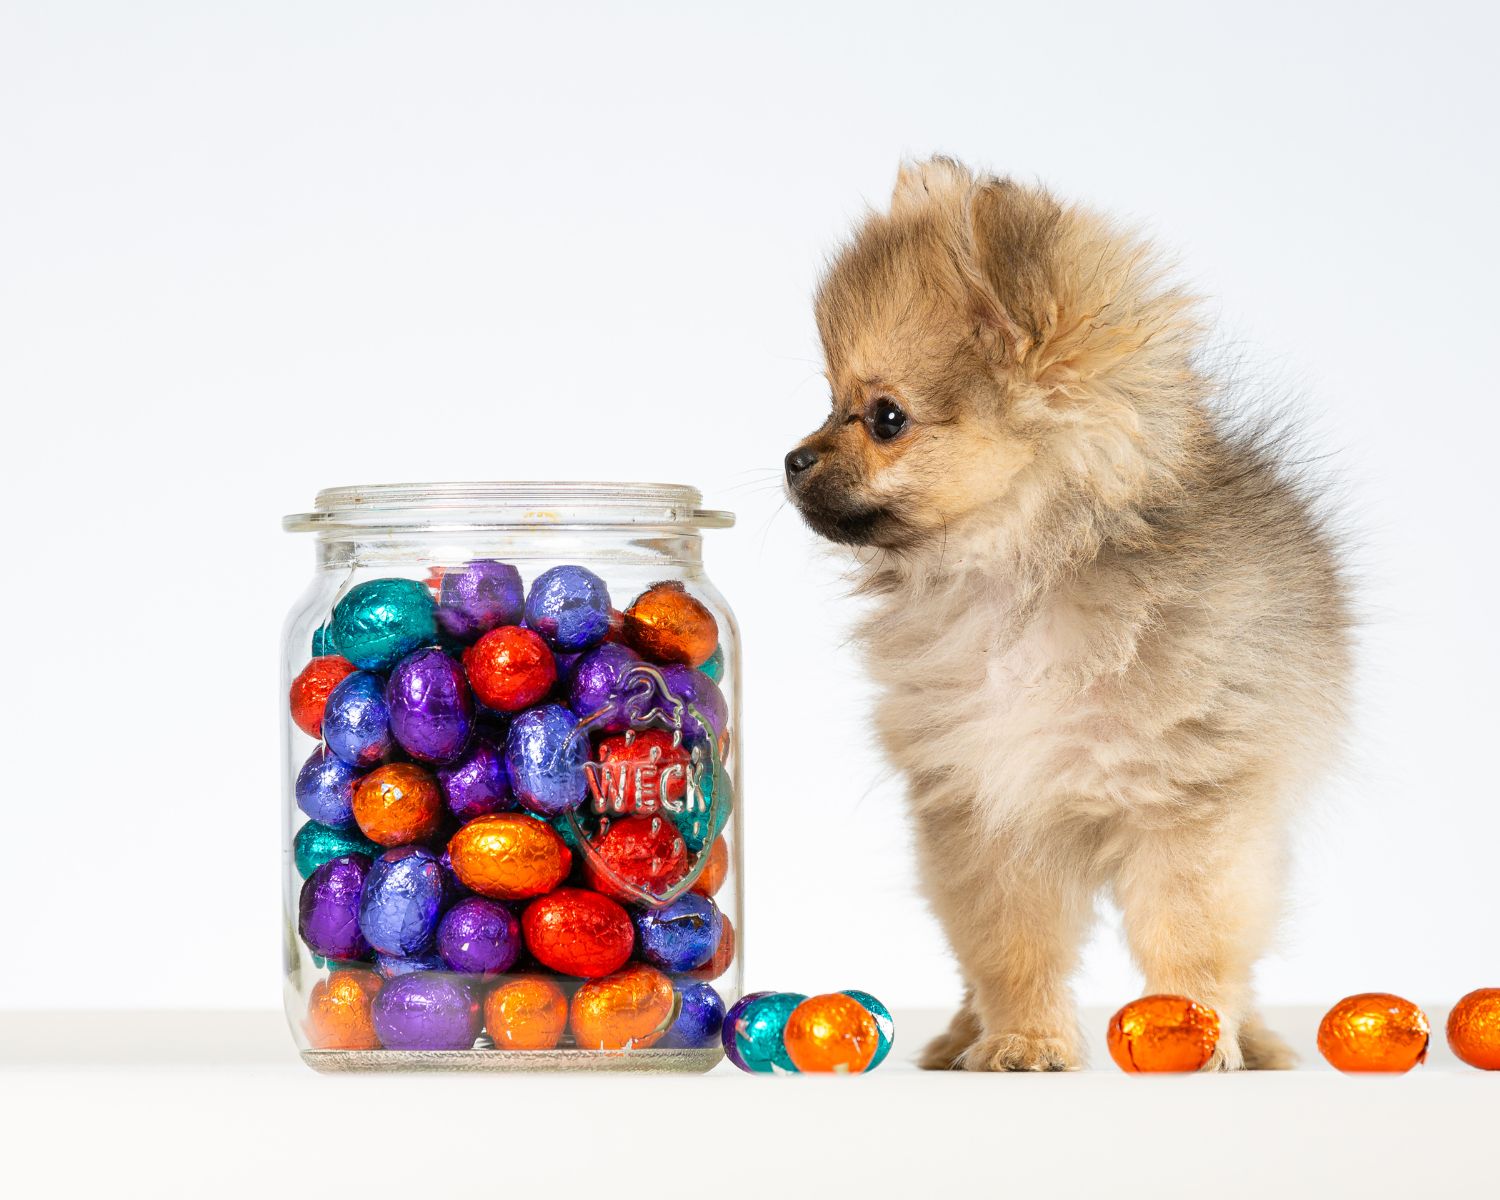 Small dog puppy standing and sniffing jar of chocolates